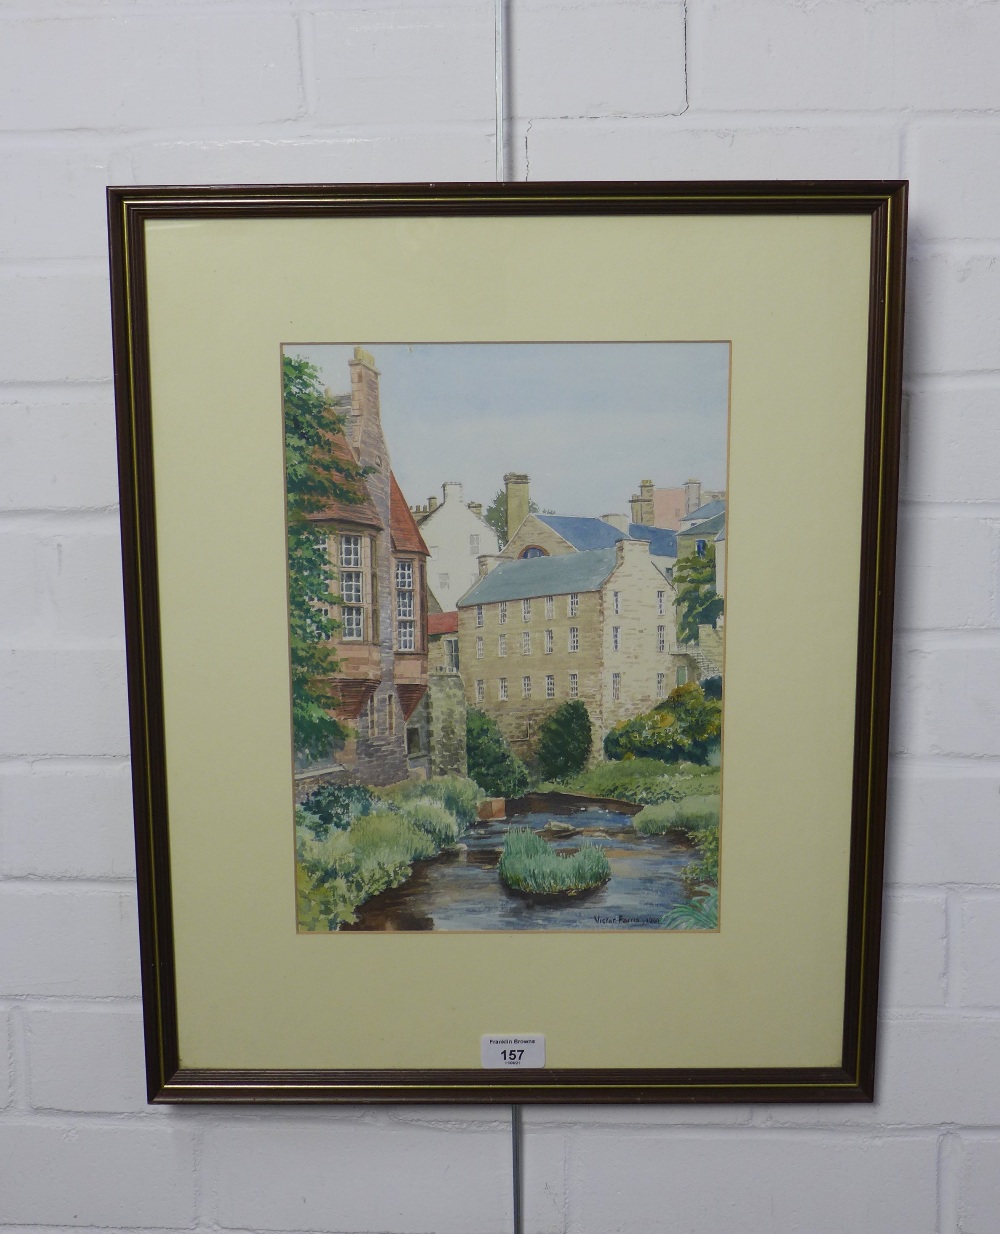 Victor Farris, watercolour of The Dean Village, Edinburgh, signed and dated 1994, framed under glas - Image 2 of 3